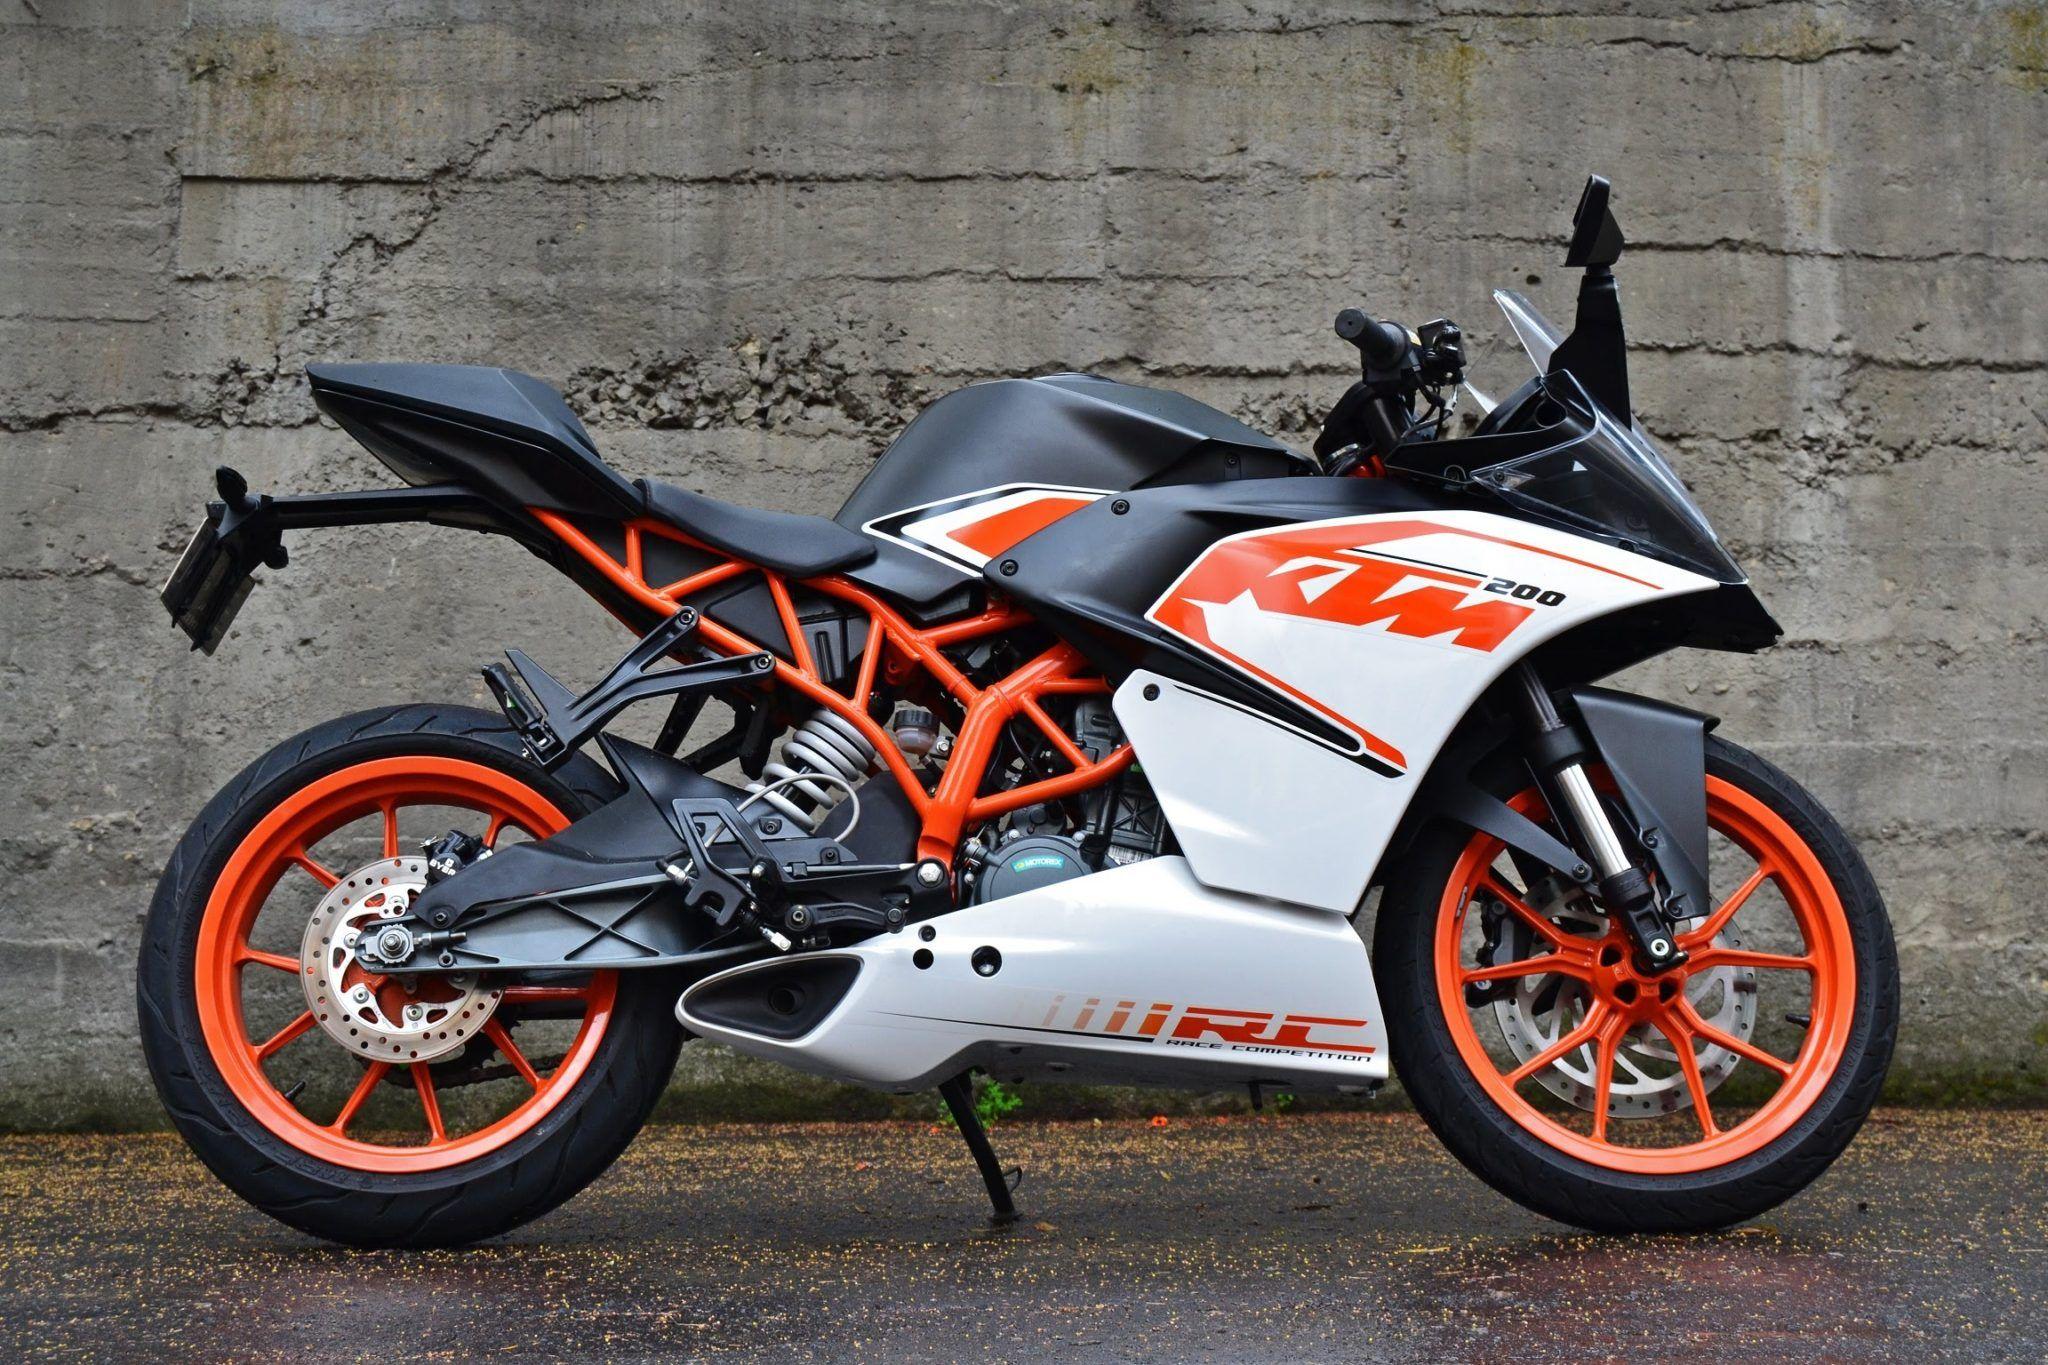 2018】KTM RC 200 Photo, Wallpaper & Picture Free Download